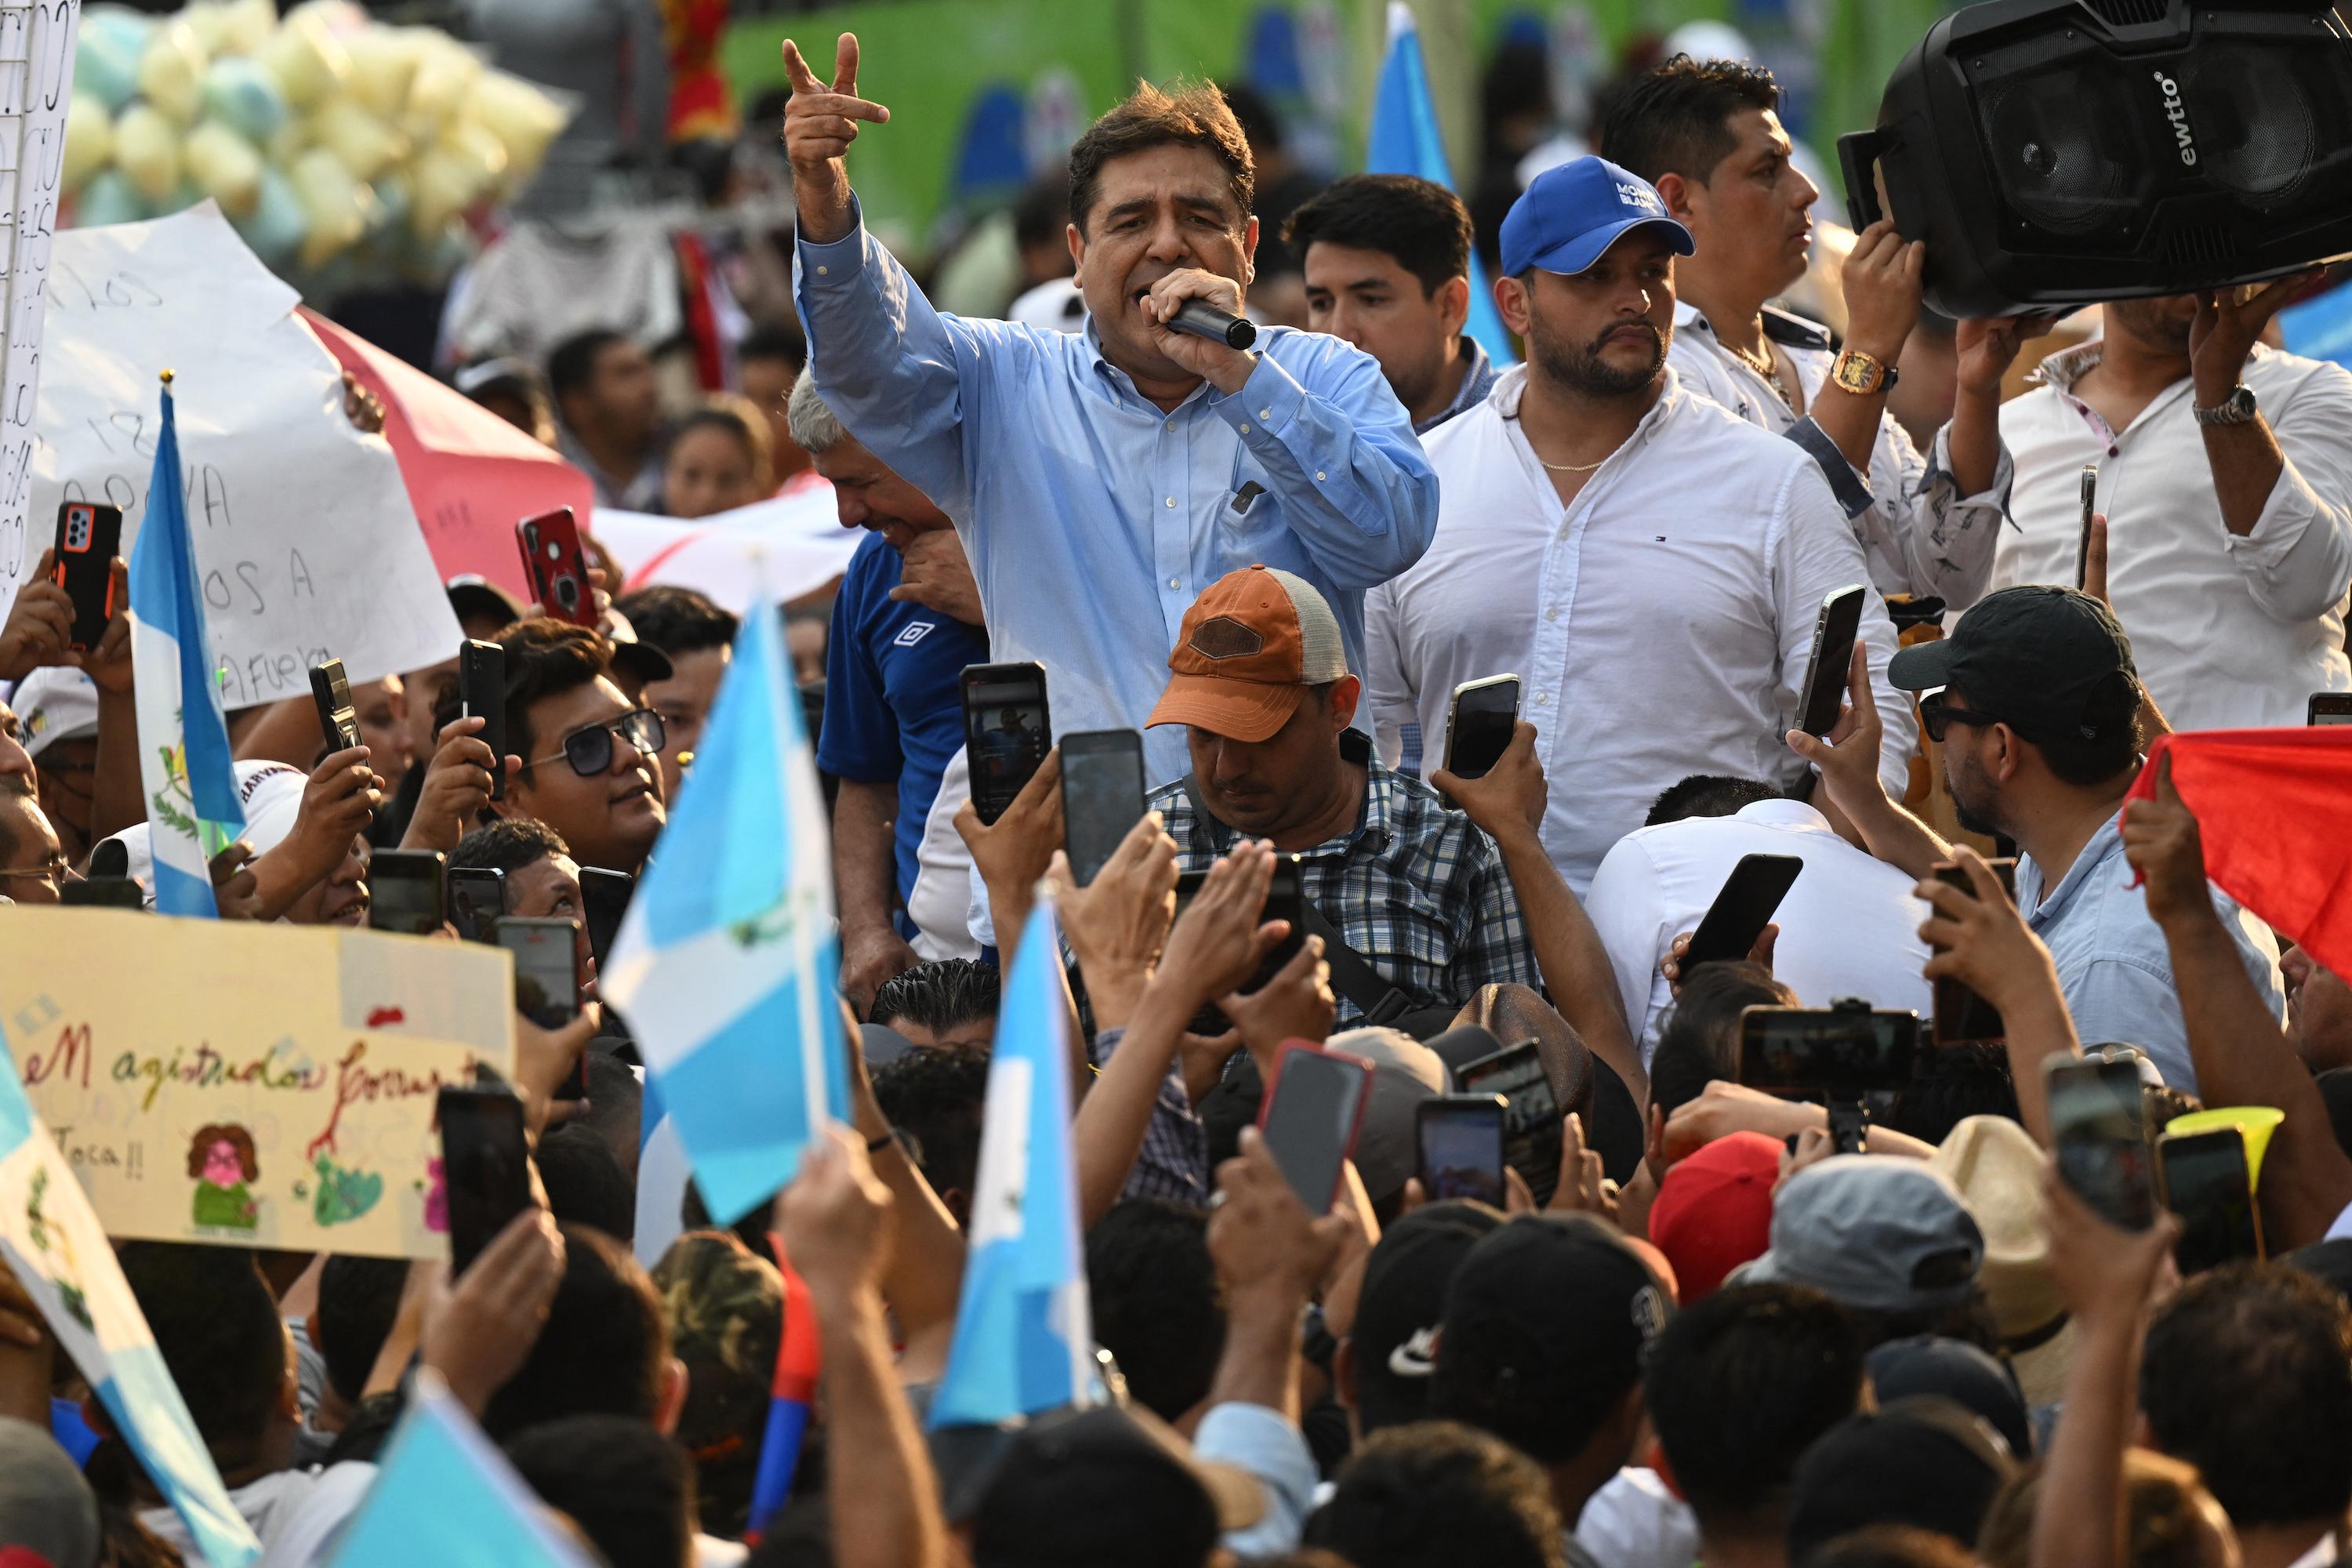 Guatemalan presidential candidate for the Prosperidad Ciudadana party Carlos Pineda speaks to supporters at Constitution Square in Guatemala City on May 20, 2023, the day after a court in Guatemala suspended his candidacy while he led the polls. Photo Johan Ordóñez/AFP